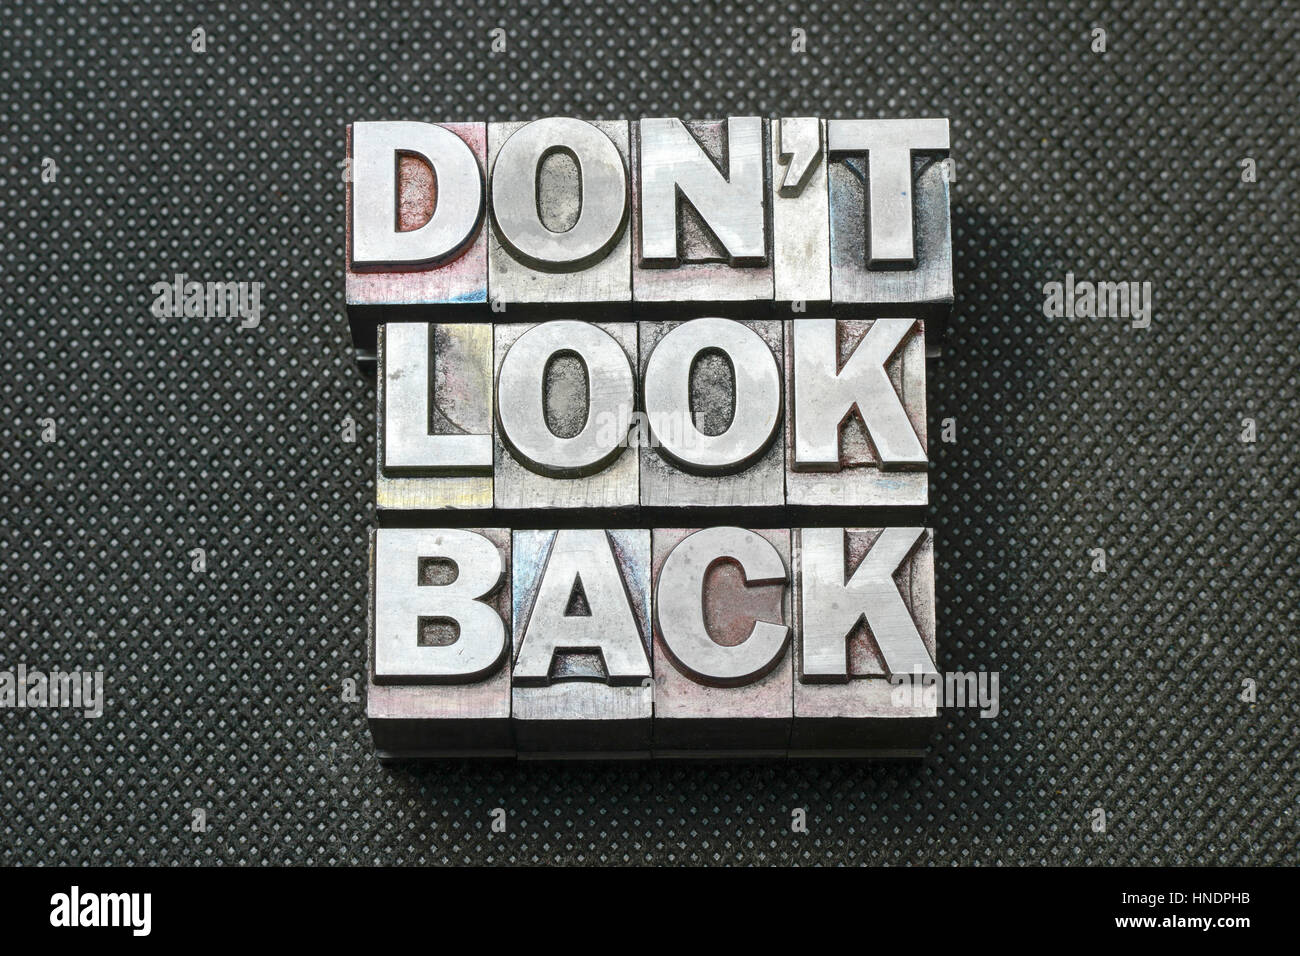 don’t look back phrase made from metallic letterpress blocks on black perforated surface Stock Photo